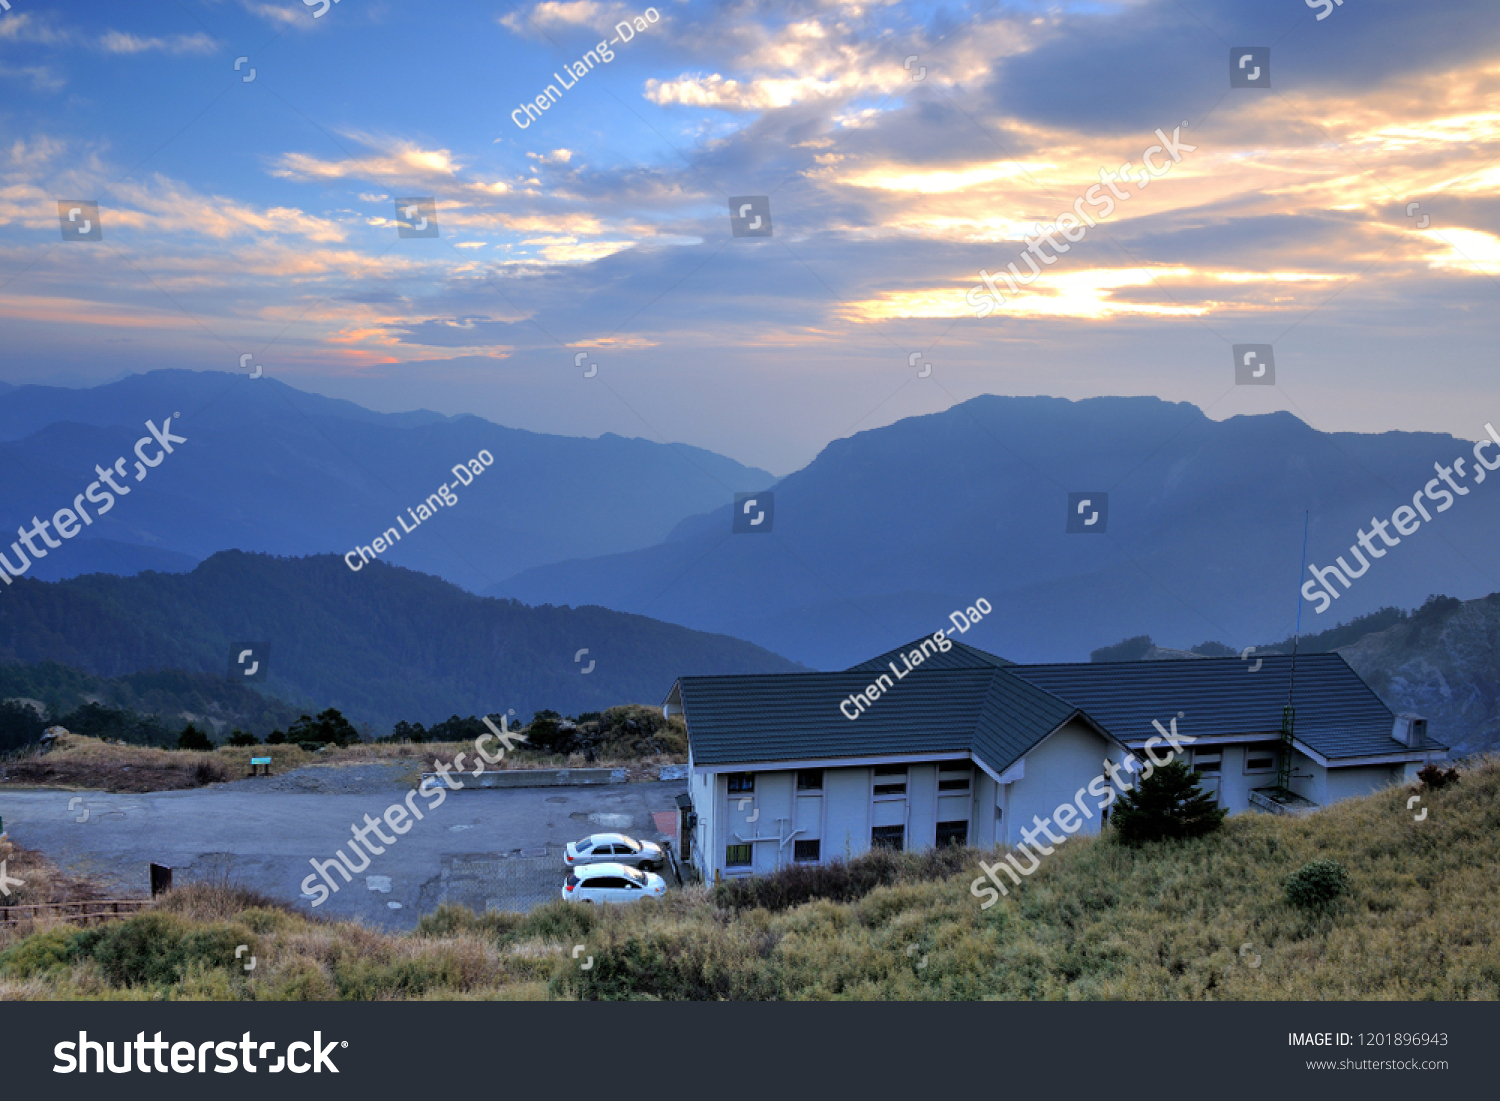 On the high mountains of the continuous mountains, the blue roofs of the white walls of the building, the blue sky has orange clouds. #1201896943